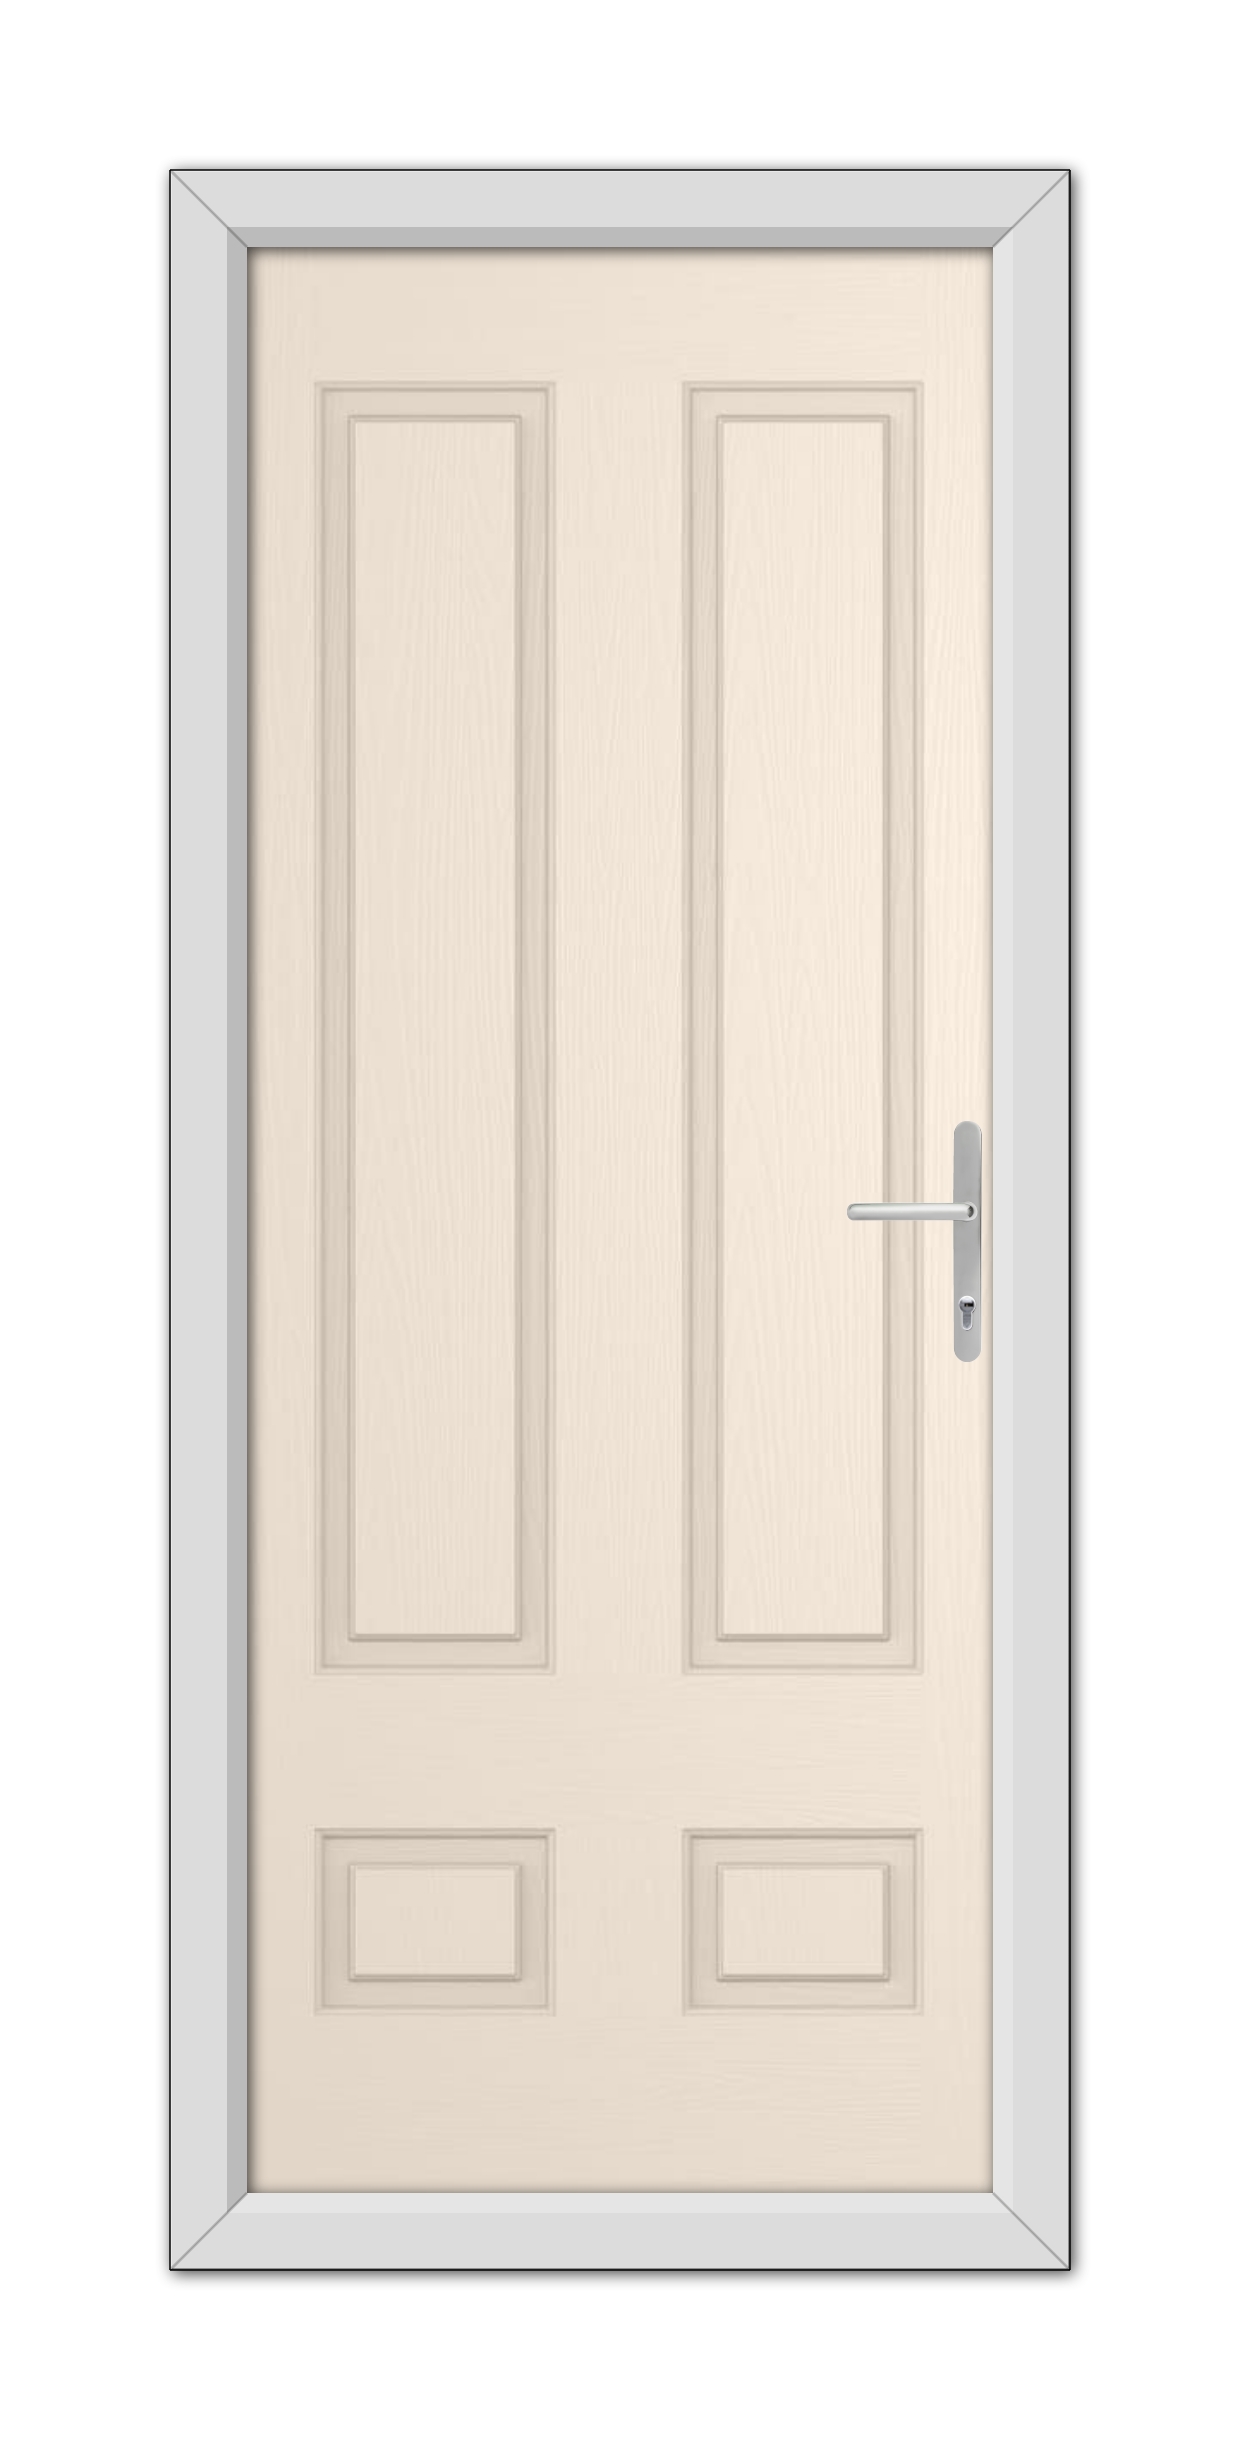 A Cream Aston Solid Composite Door 48mm Timber Core with a silver handle on the right side, framed by a simple gray border.